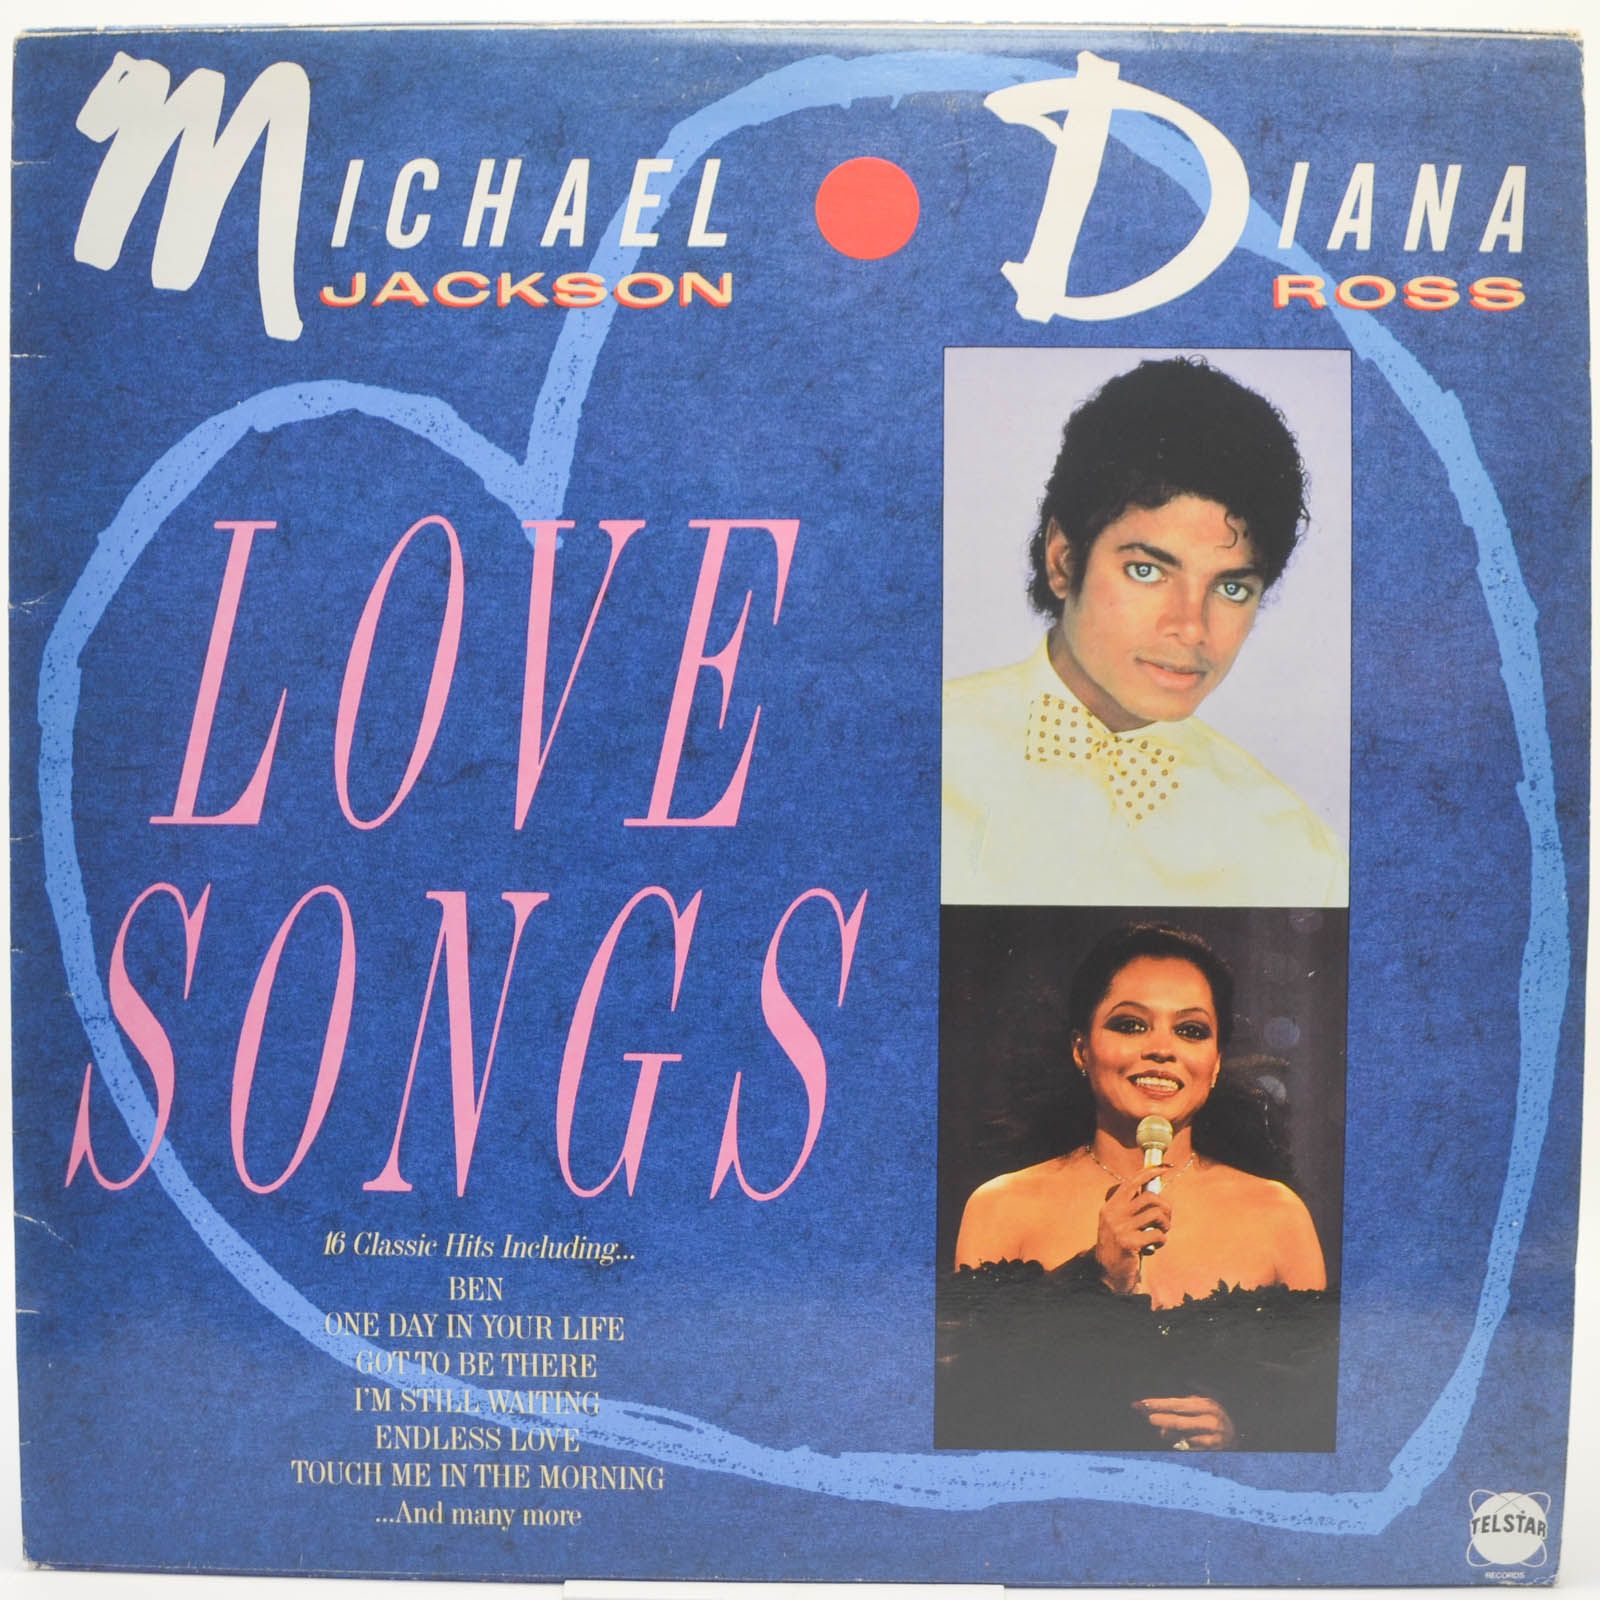 Michael Jackson And Diana Ross — Love Songs (UK), 1988